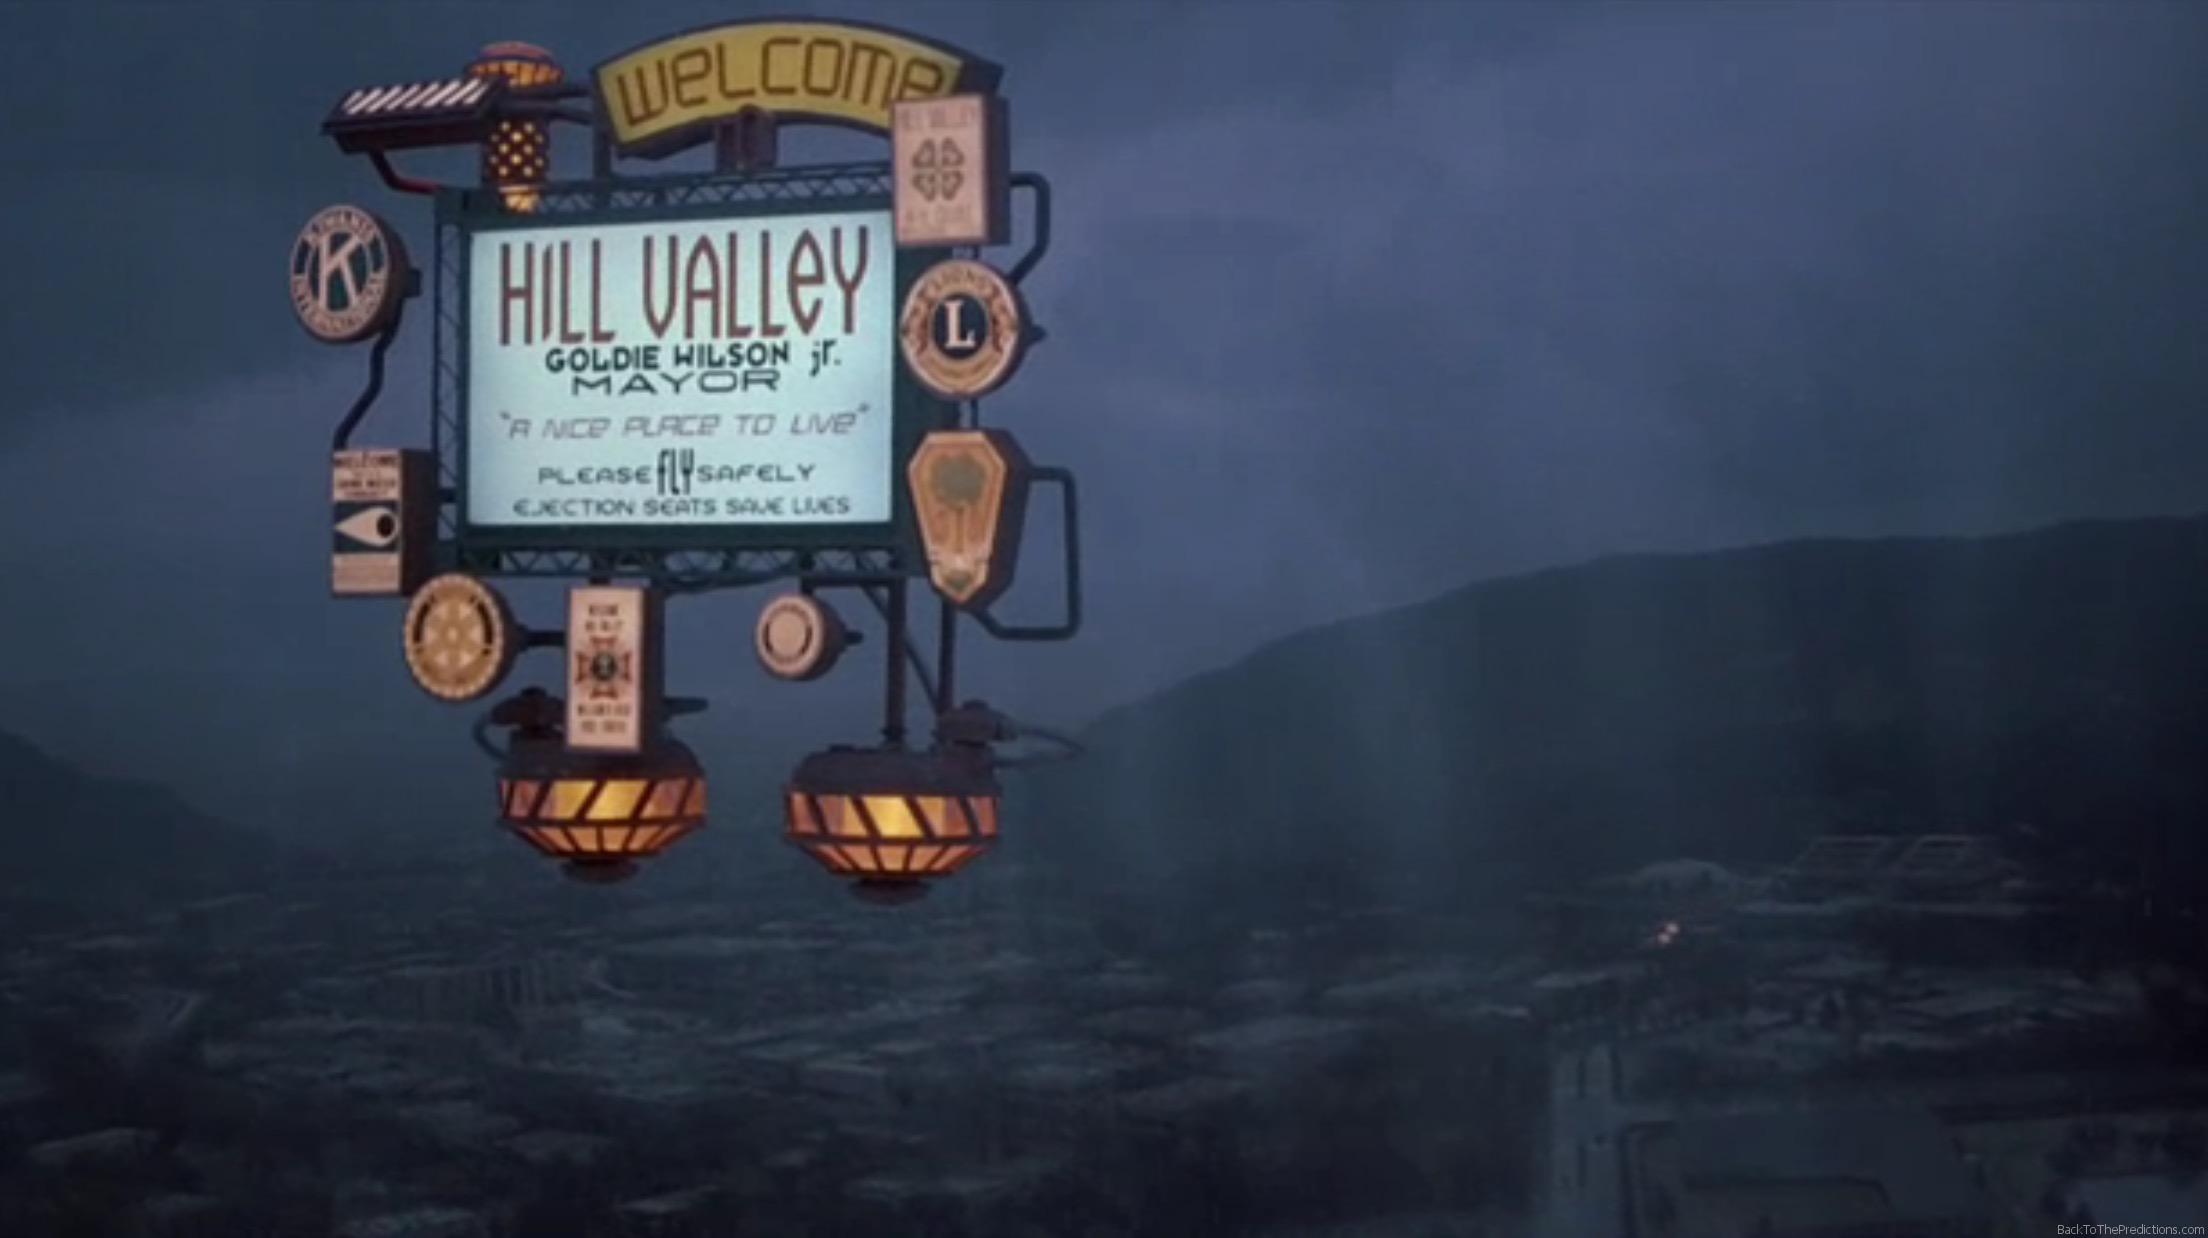 Welcome to Hill Valley